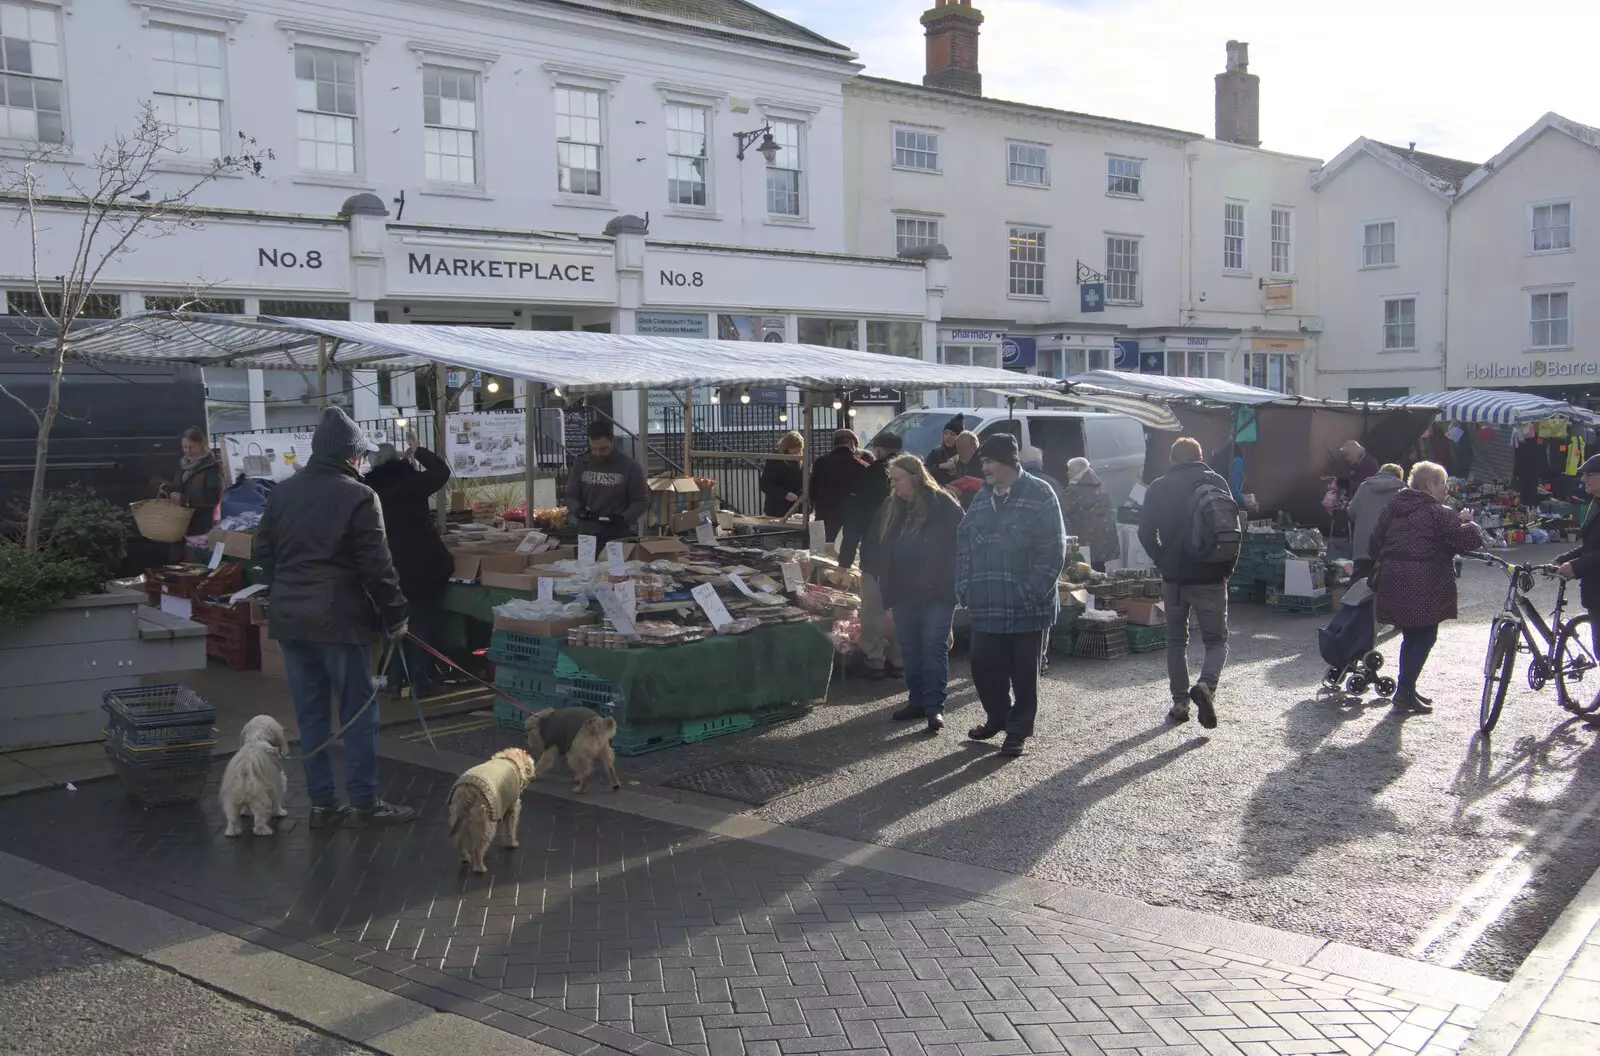 More Friday market action in Diss, from A February Miscellany, Diss and Woodbridge, Suffolk - 3rd February 2024